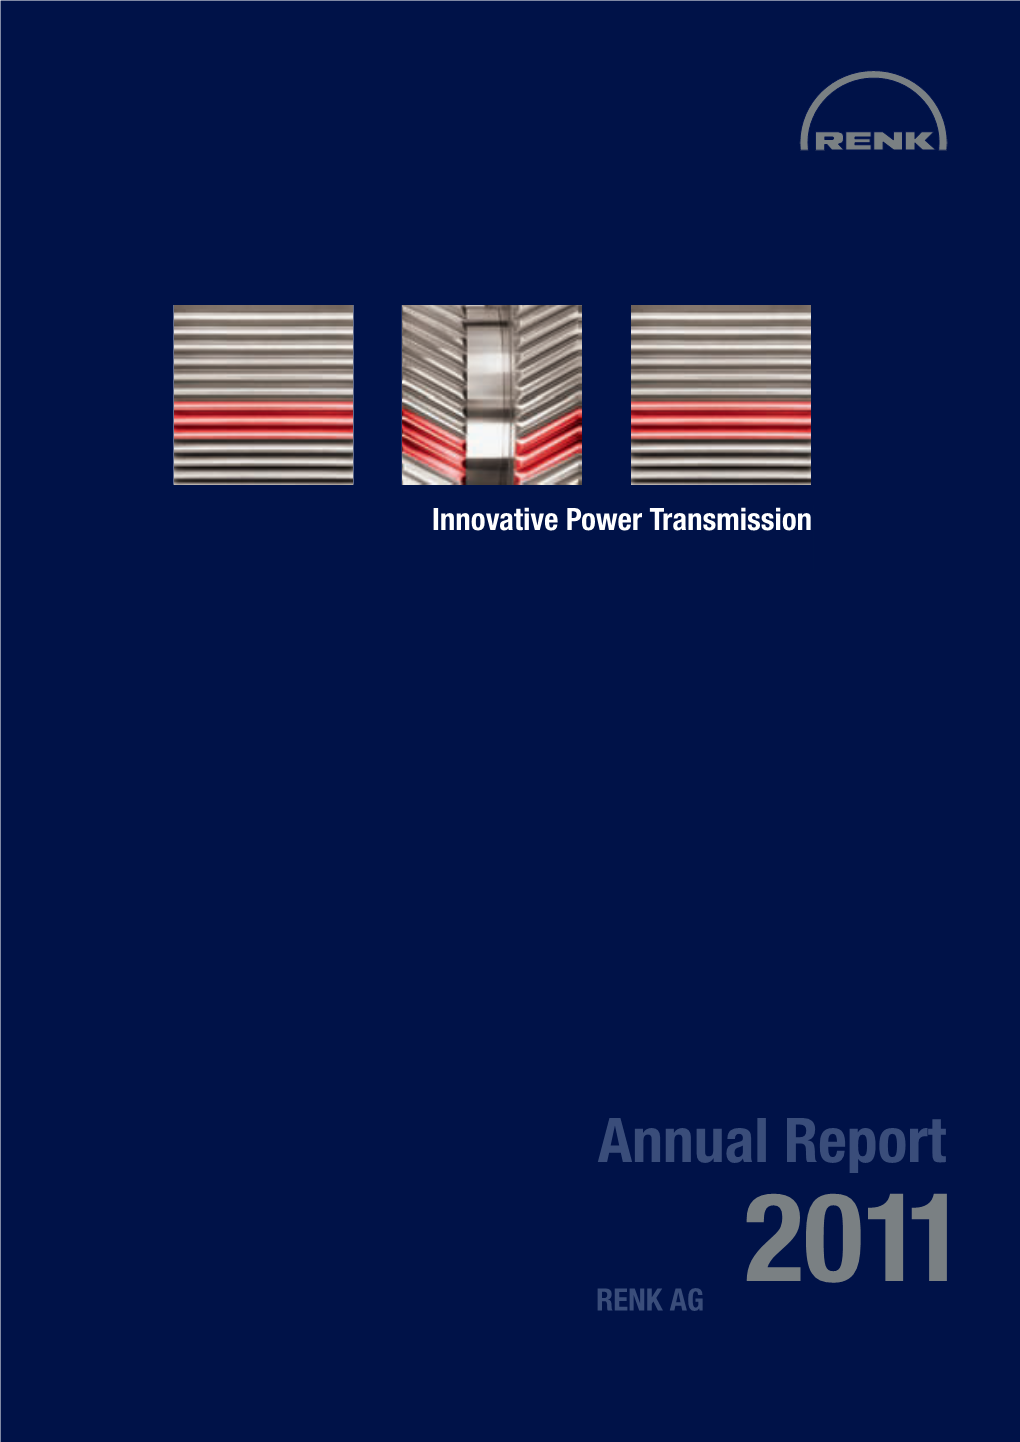 Annual Report RENK 2011 an MAN Group Company